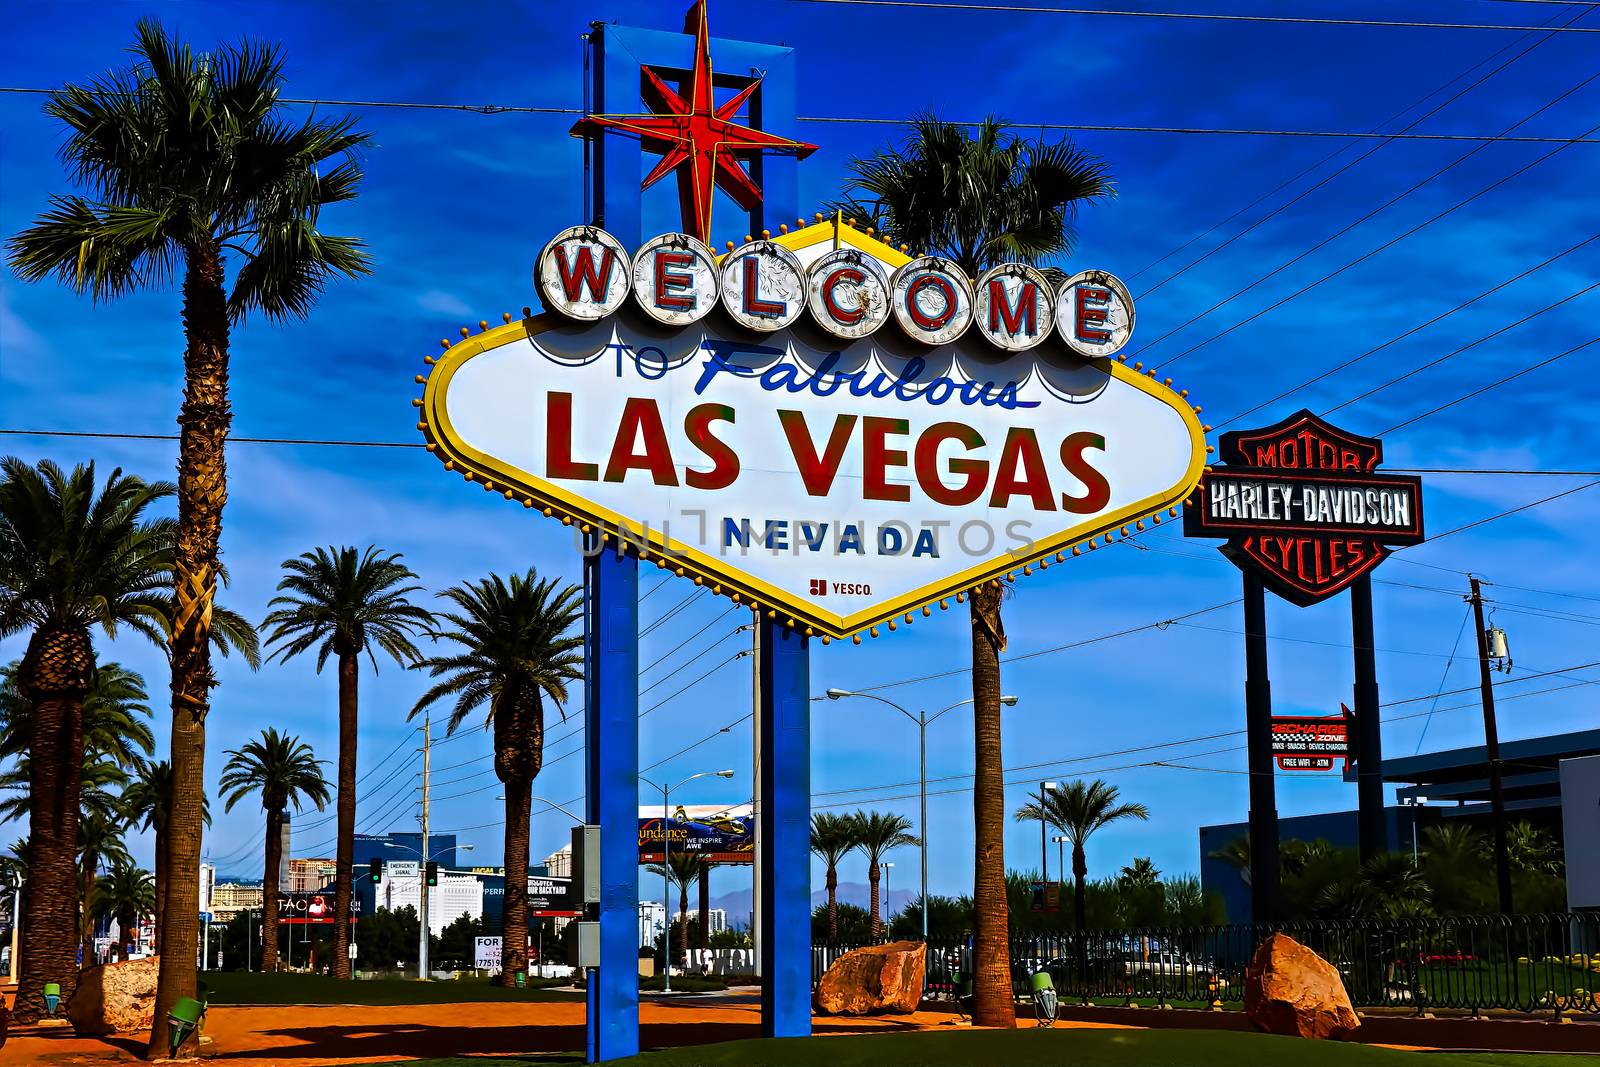 The Welcome to Fabulous Las Vegas sign on bright sunny day in Las Vegas, Nevada USA,07 Oct 2016 by USA-TARO